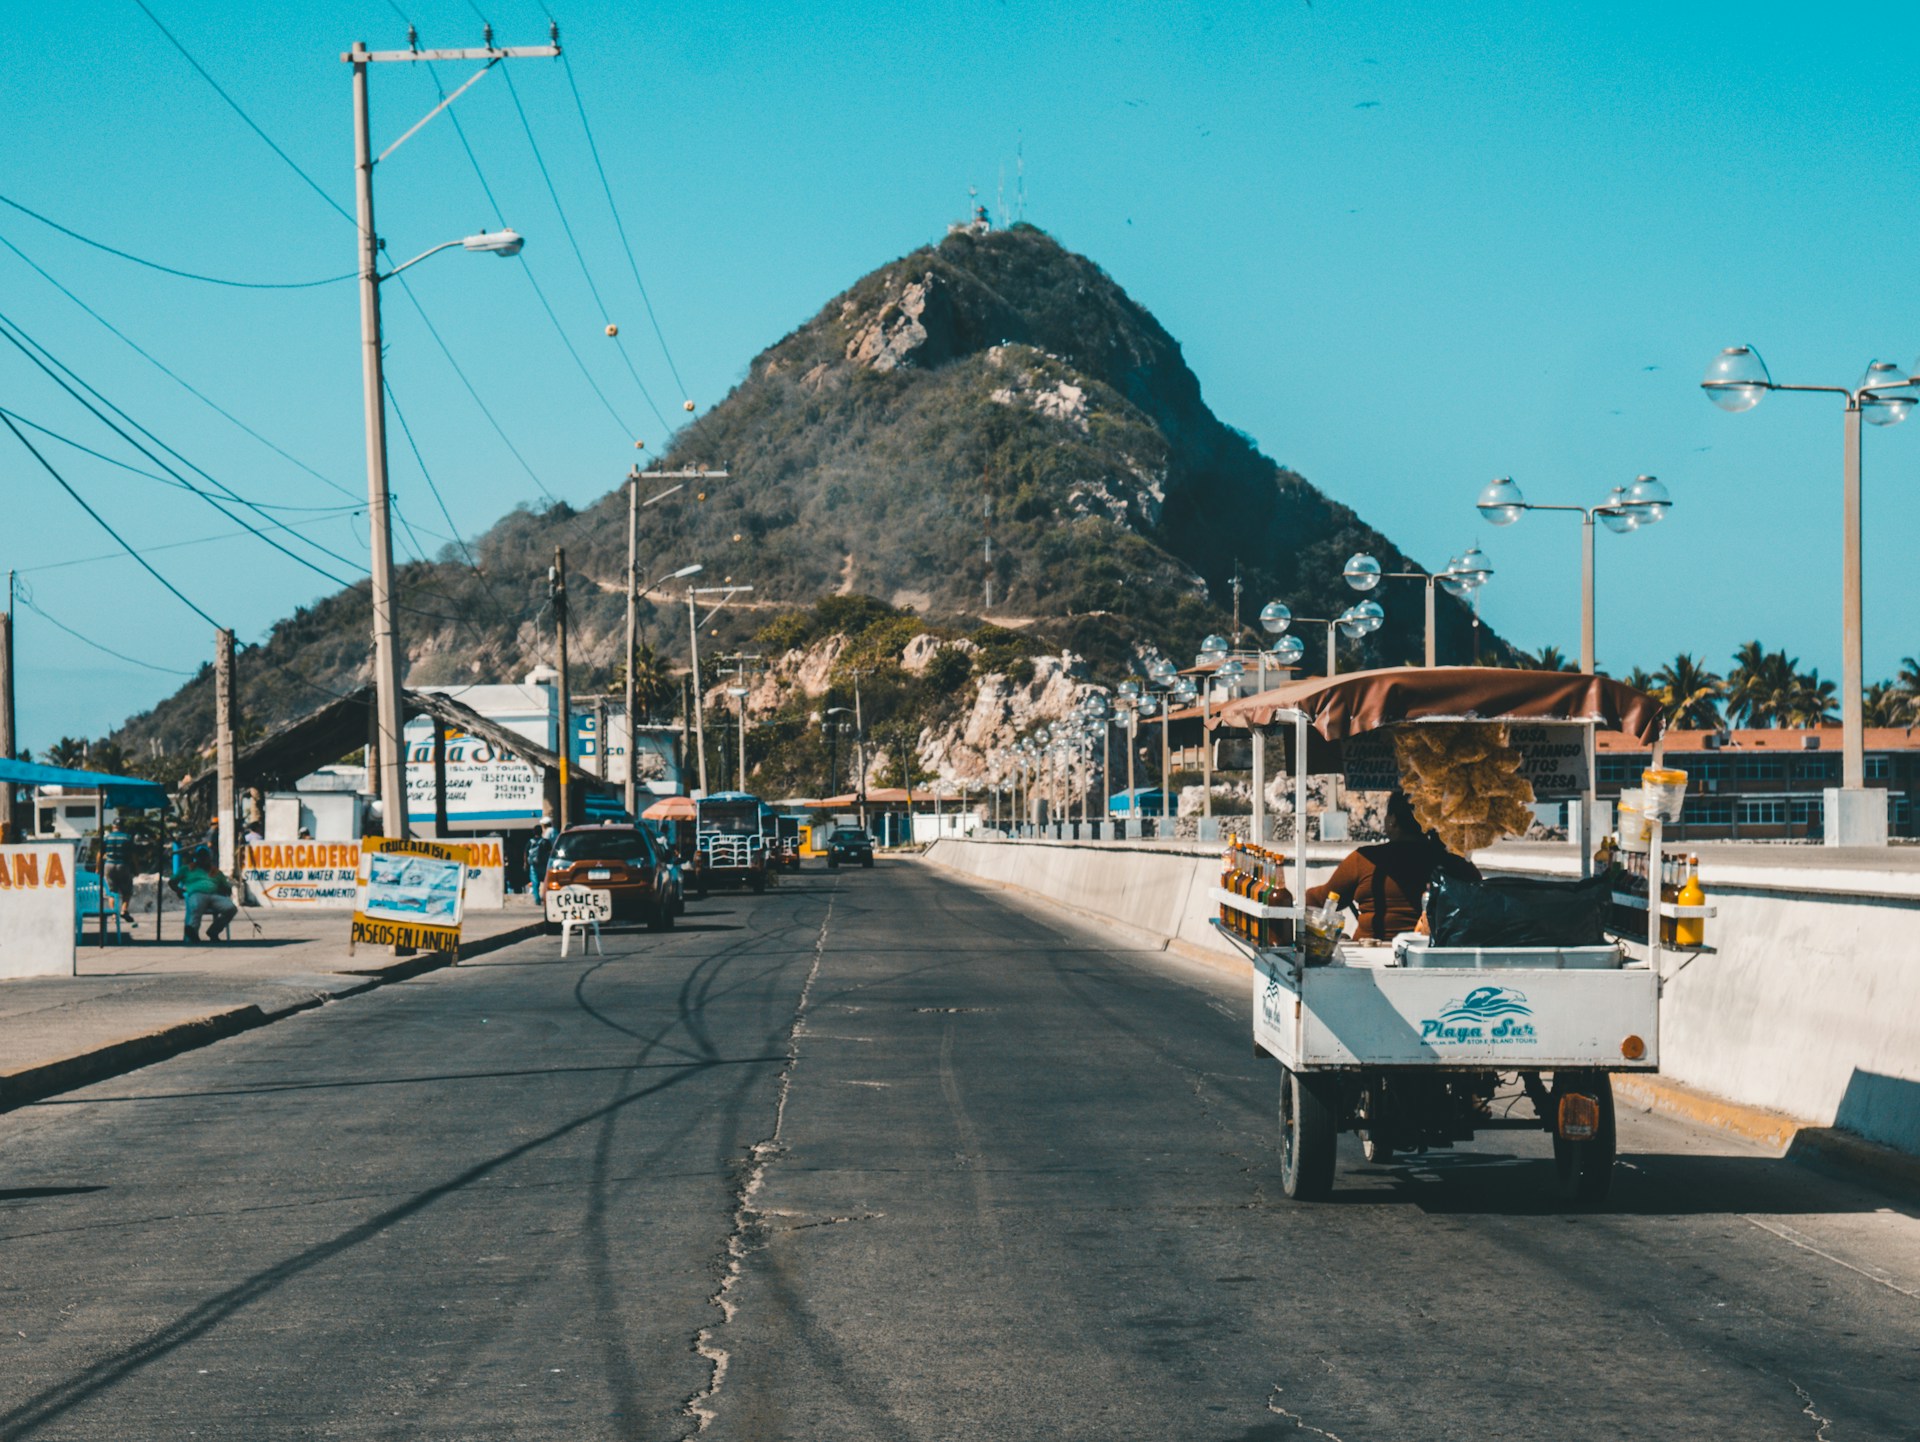 The road in Old Mazatlan. Lots of shacks on the side of the road and a large hill in the background.